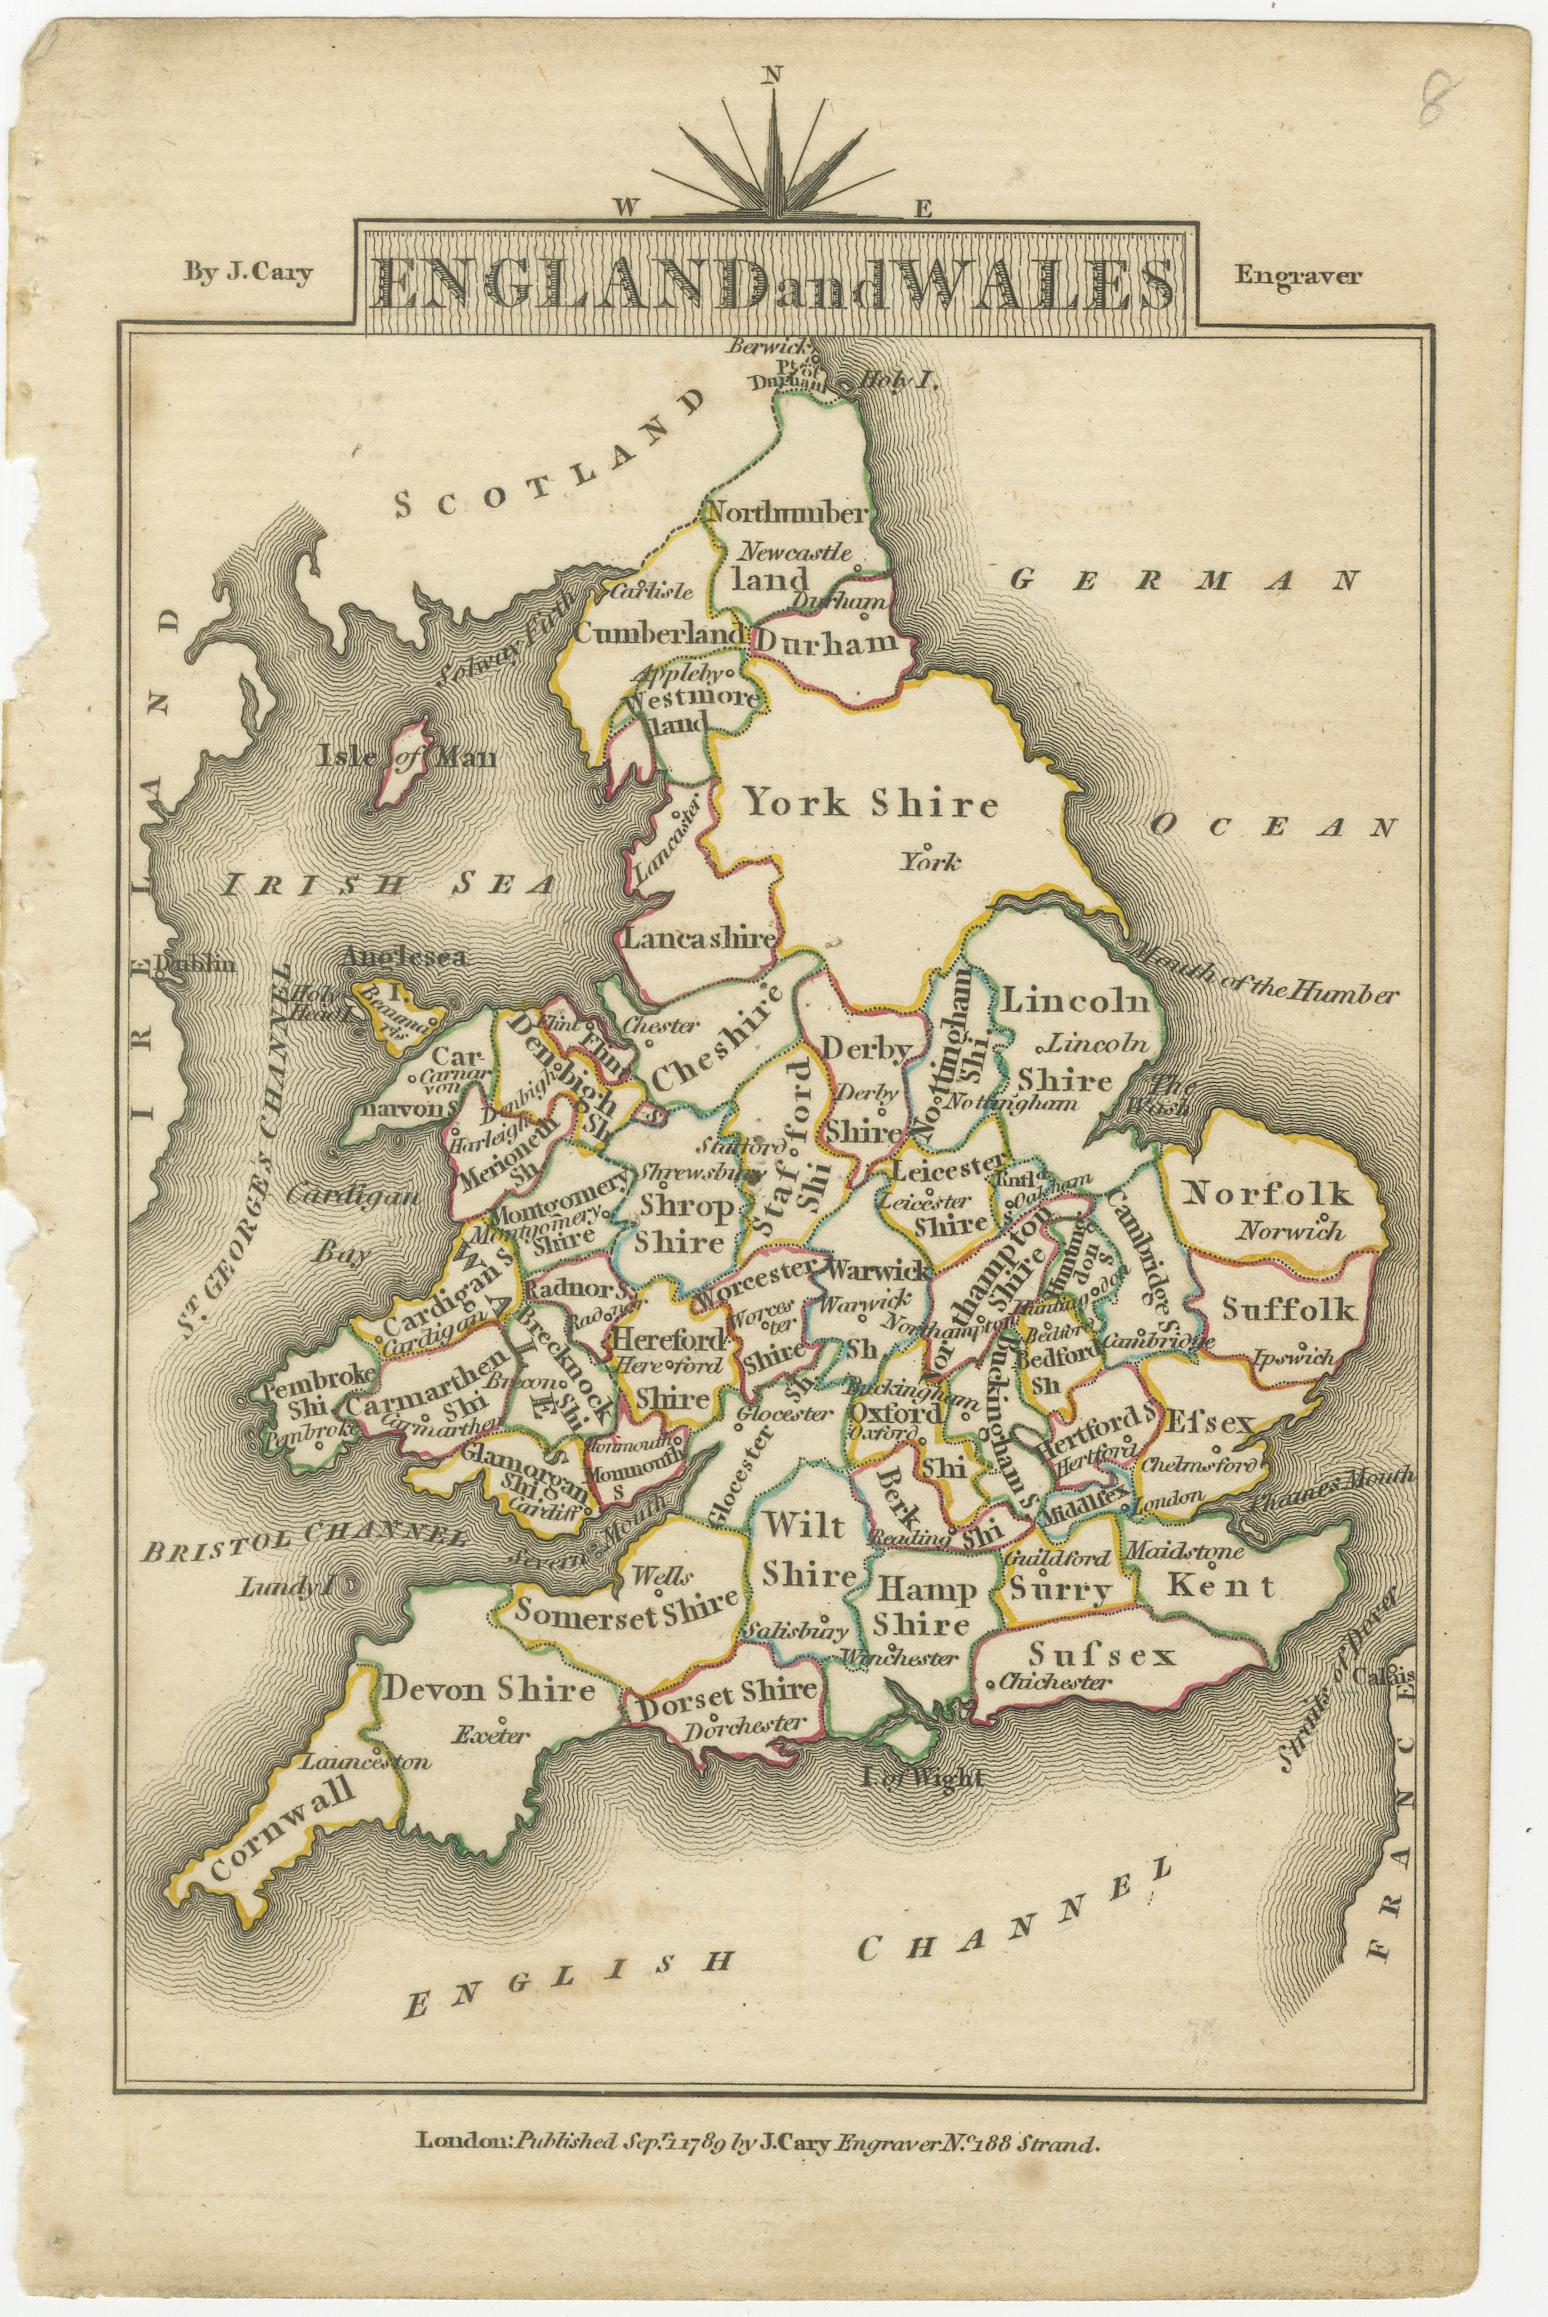 Antique map titled 'England and Wales'. An attractive miniature map of England and Wales enhanced with hand coloring. Originates from Cary's 'Traveller's Companion', 1789.